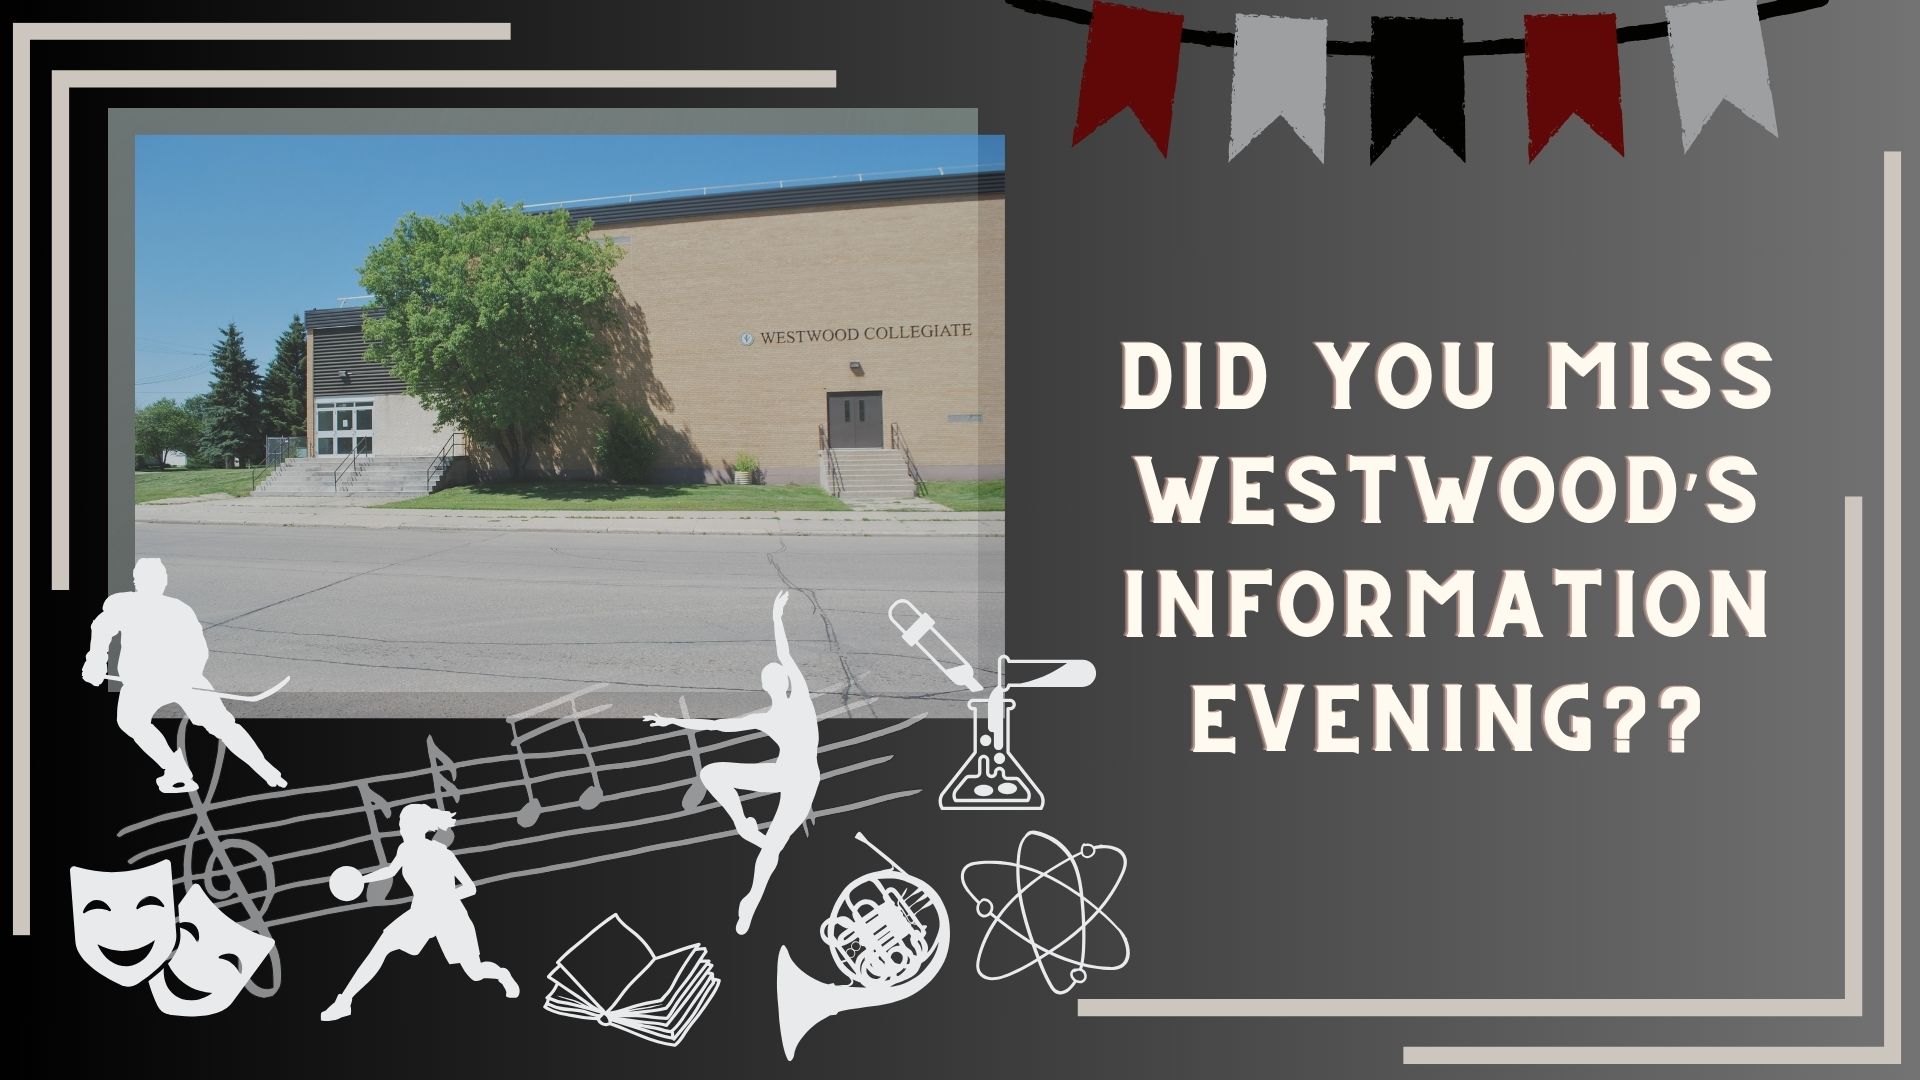 Do you want to learn more about Westwood?